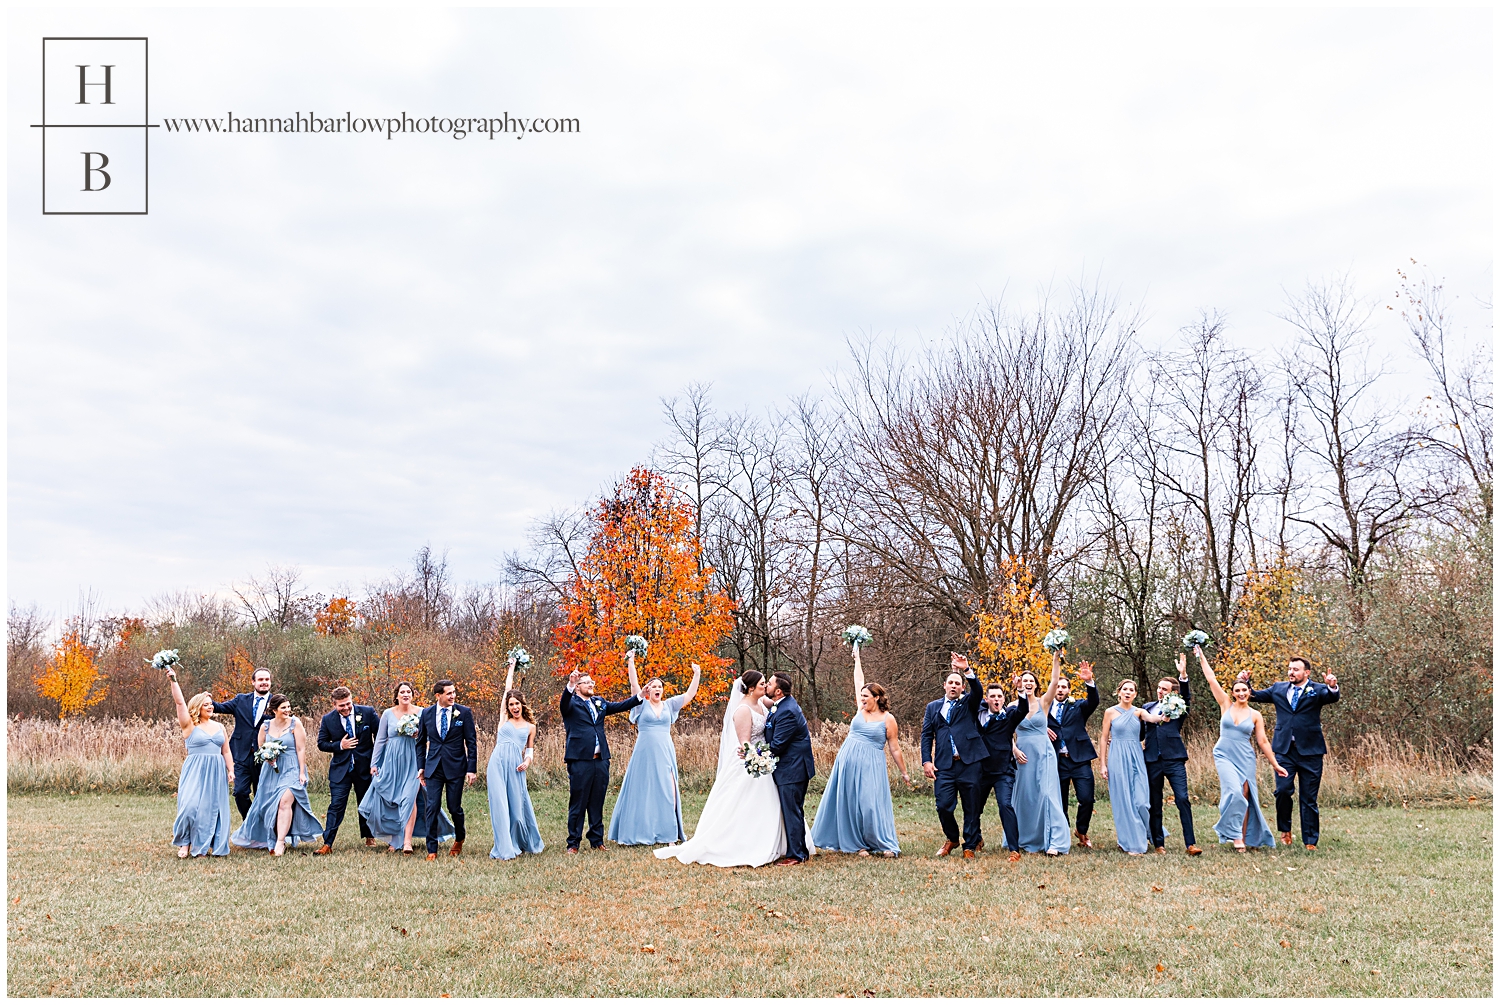 Bridal party wearing blue walks with bride and groom and cheers